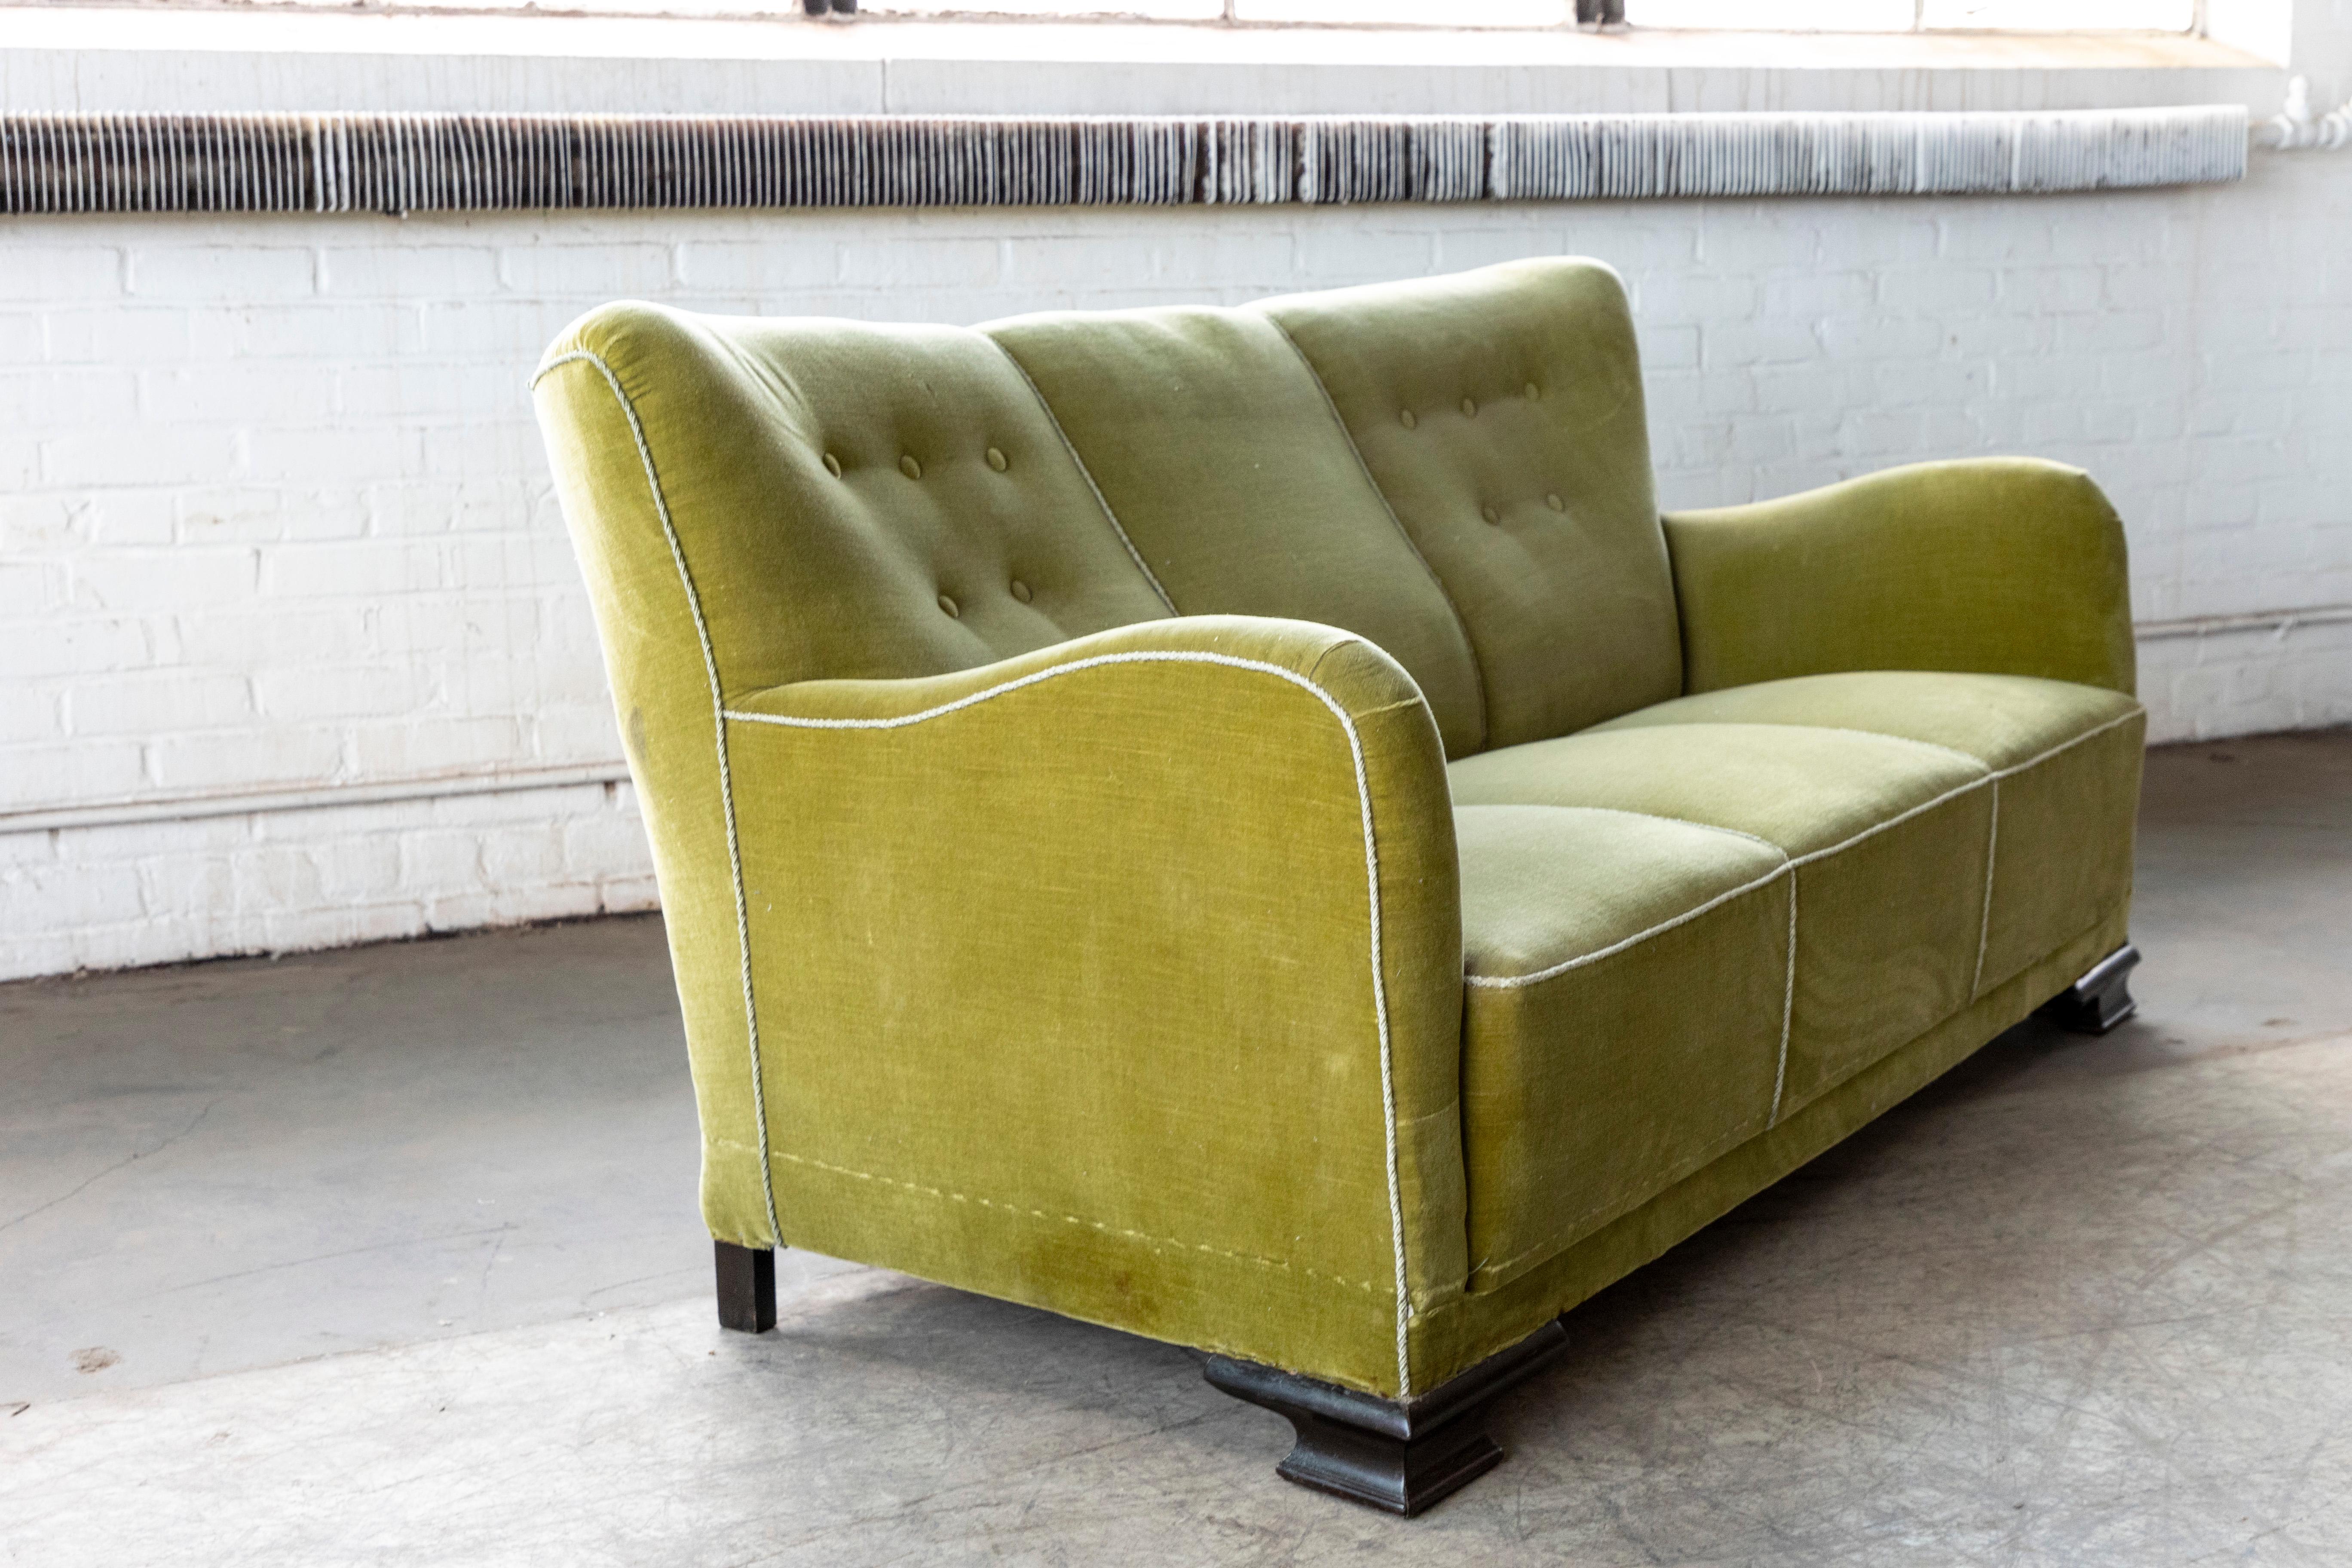 Danish Midcentury Sofa in Green Mohair with Art Deco Legs For Sale 3